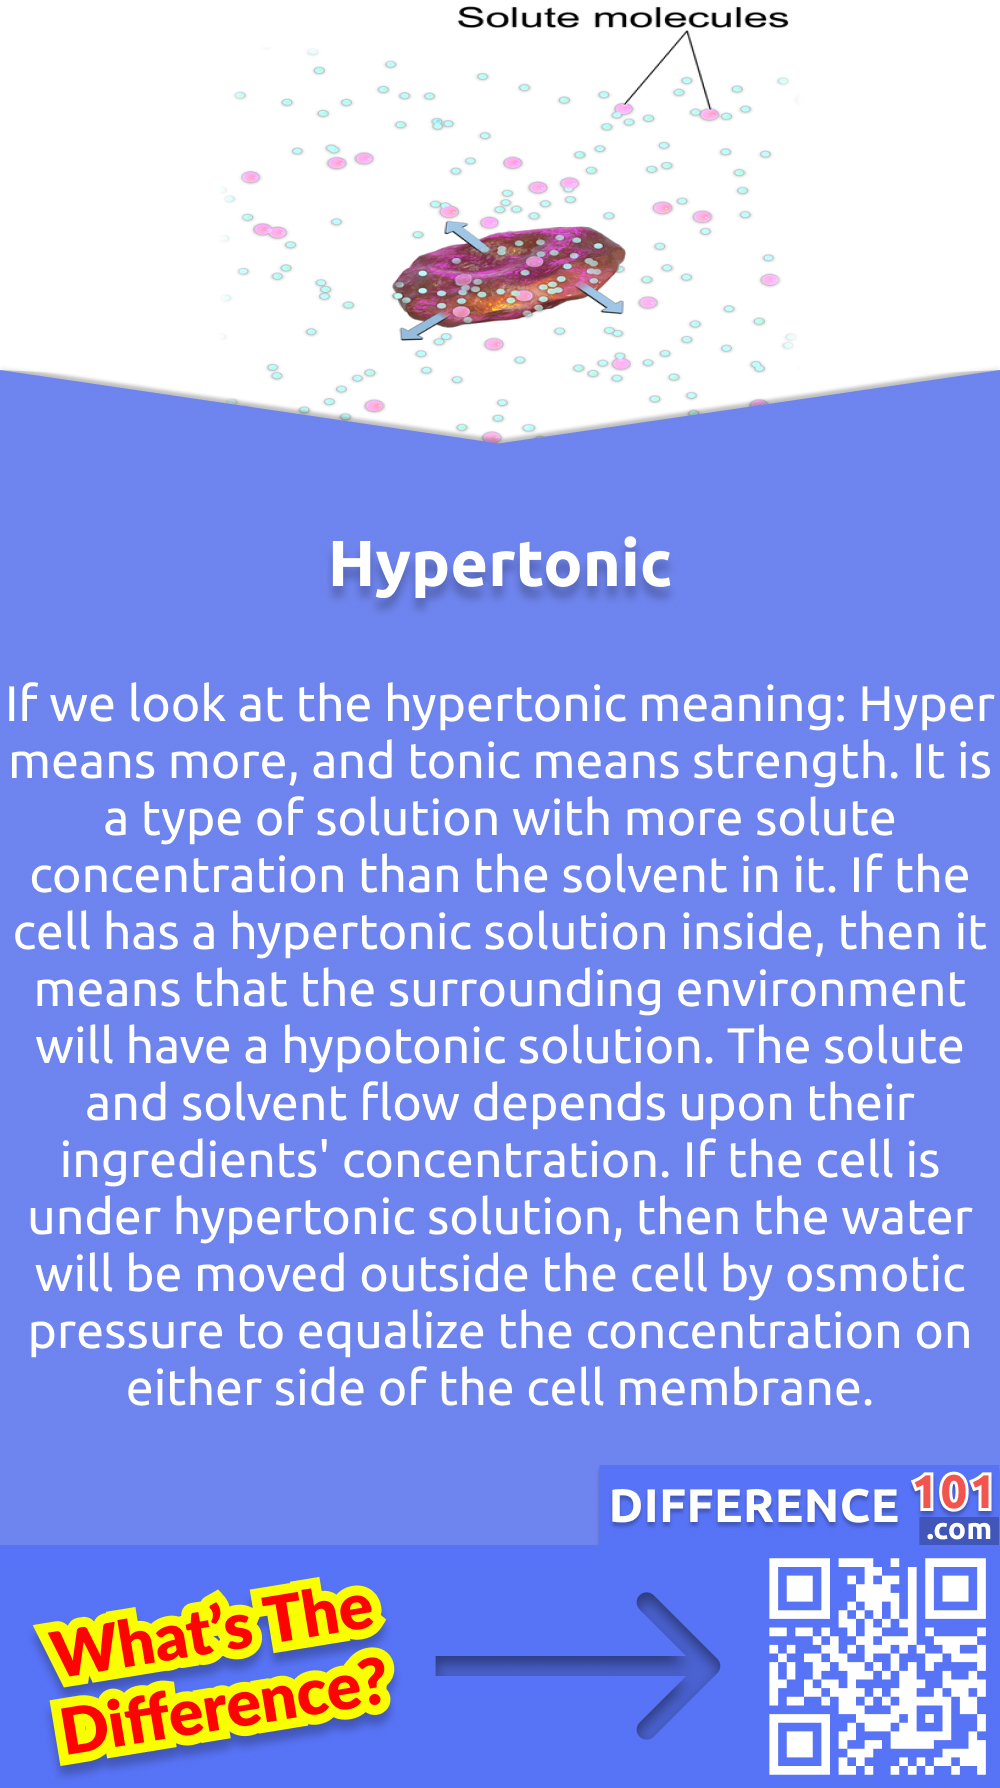 What Is Hypertonic? If we look at the hypertonic meaning: Hyper means more, and tonic means strength. It is a type of solution with more solute concentration than the solvent in it. If the cell has a hypertonic solution inside, then it means that the surrounding environment will have a hypotonic solution. The solute and solvent flow depends upon their ingredients' concentration. If the cell is under hypertonic solution, then the water will be moved outside the cell by osmotic pressure to equalize the concentration on either side of the cell membrane. Plant cells use hypertonic solutions to draw water into the vacuole. Moreover, the nerve cells of the animals also depend upon the ions of hypertonic solution. Which generates an action potential.